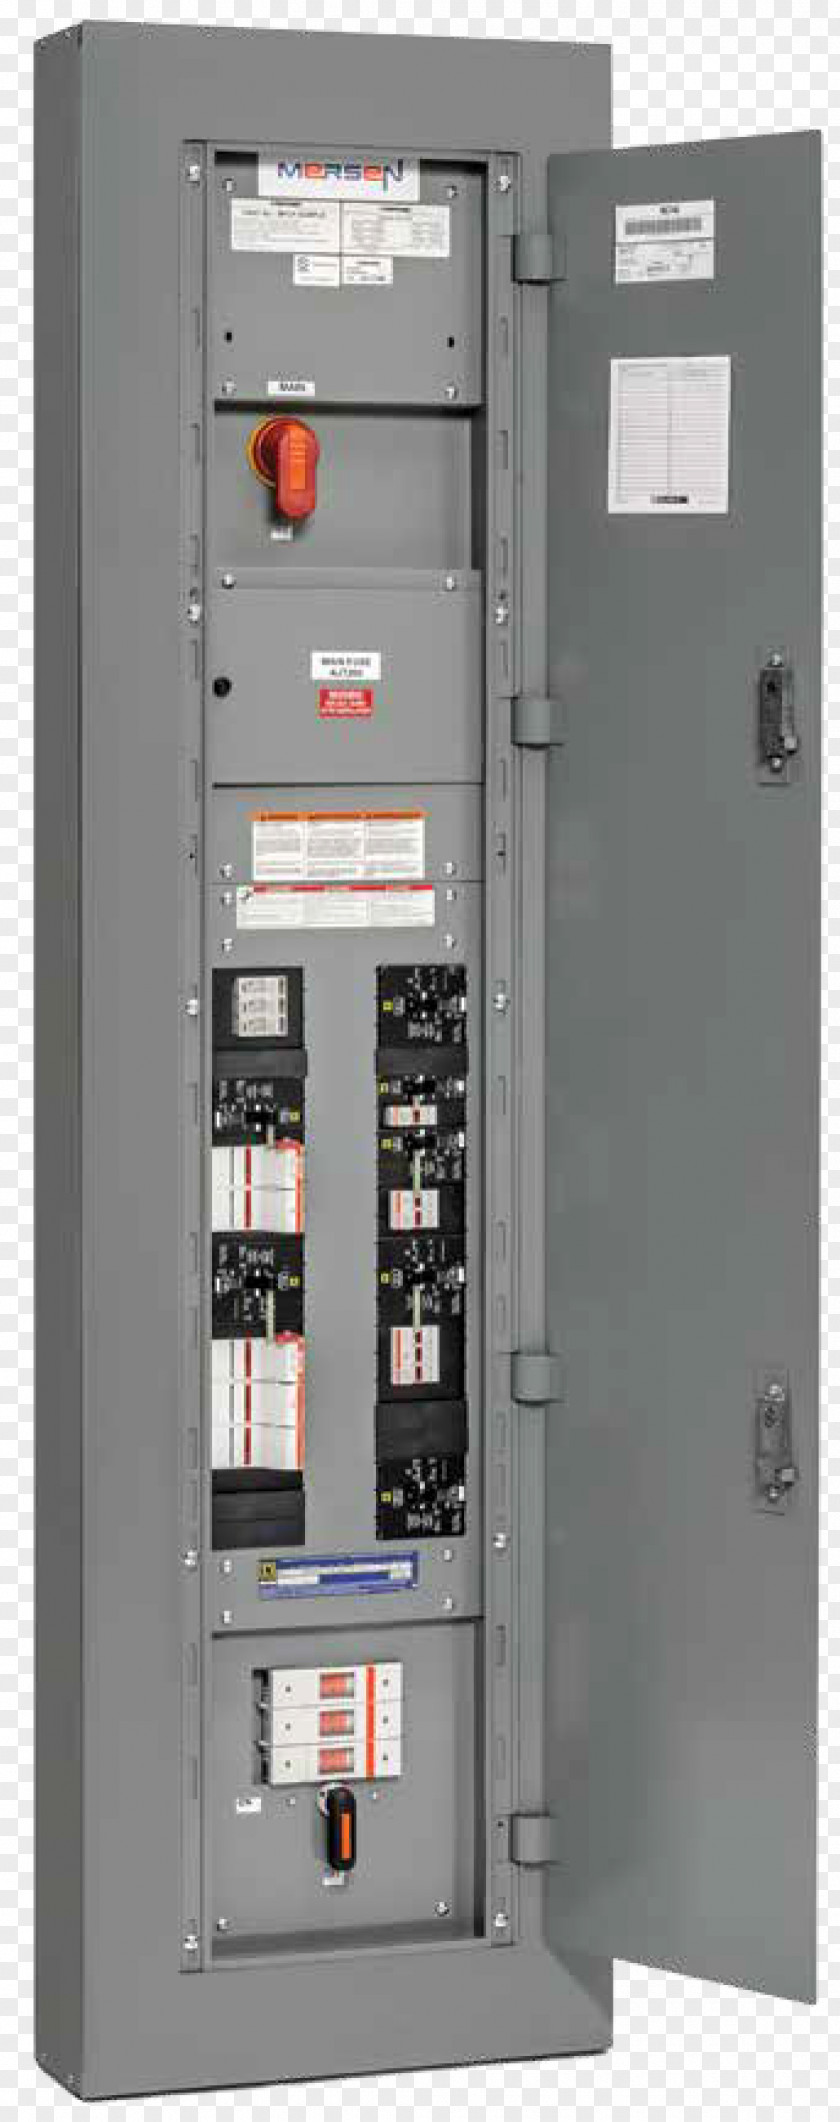 Panel Electric Circuit Breaker Electrical Wires & Cable Wiring Diagram PNG